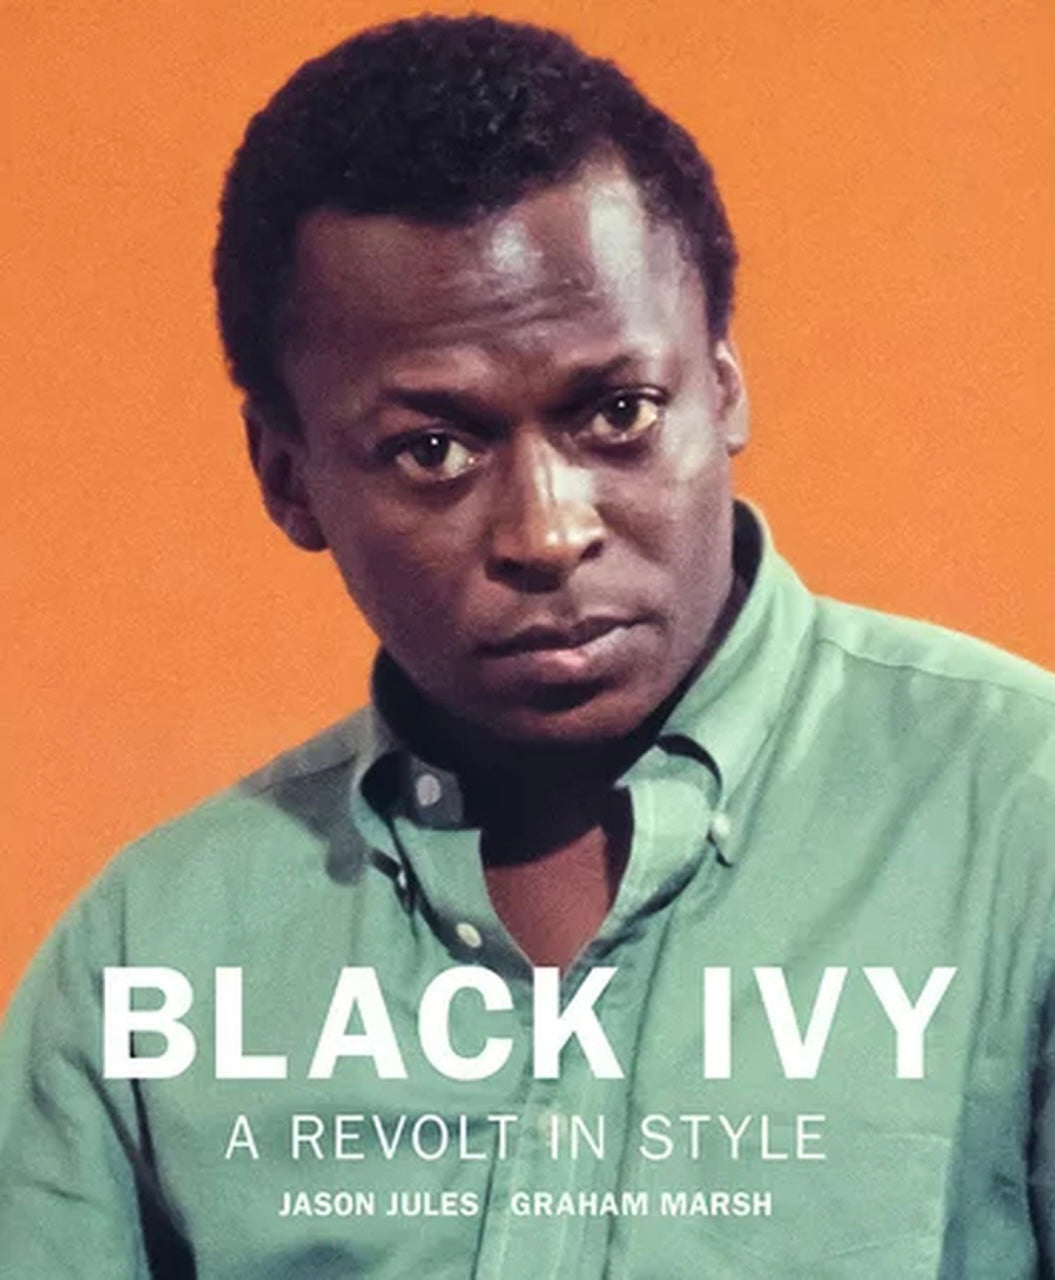 BLACK IVY A Revolt in Style